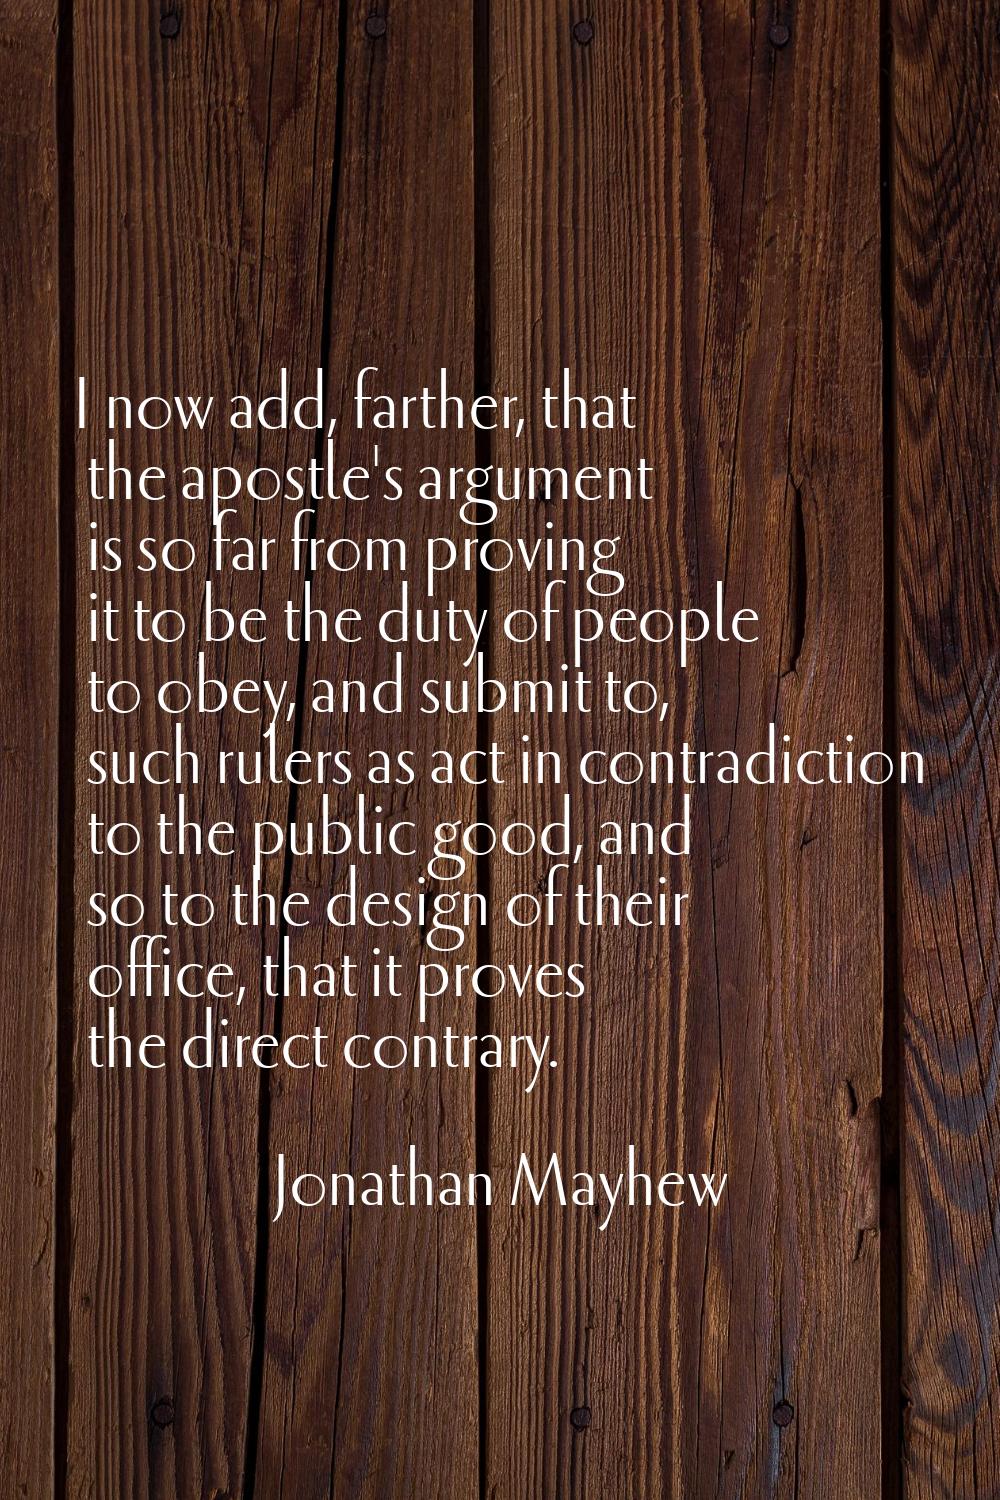 I now add, farther, that the apostle's argument is so far from proving it to be the duty of people 